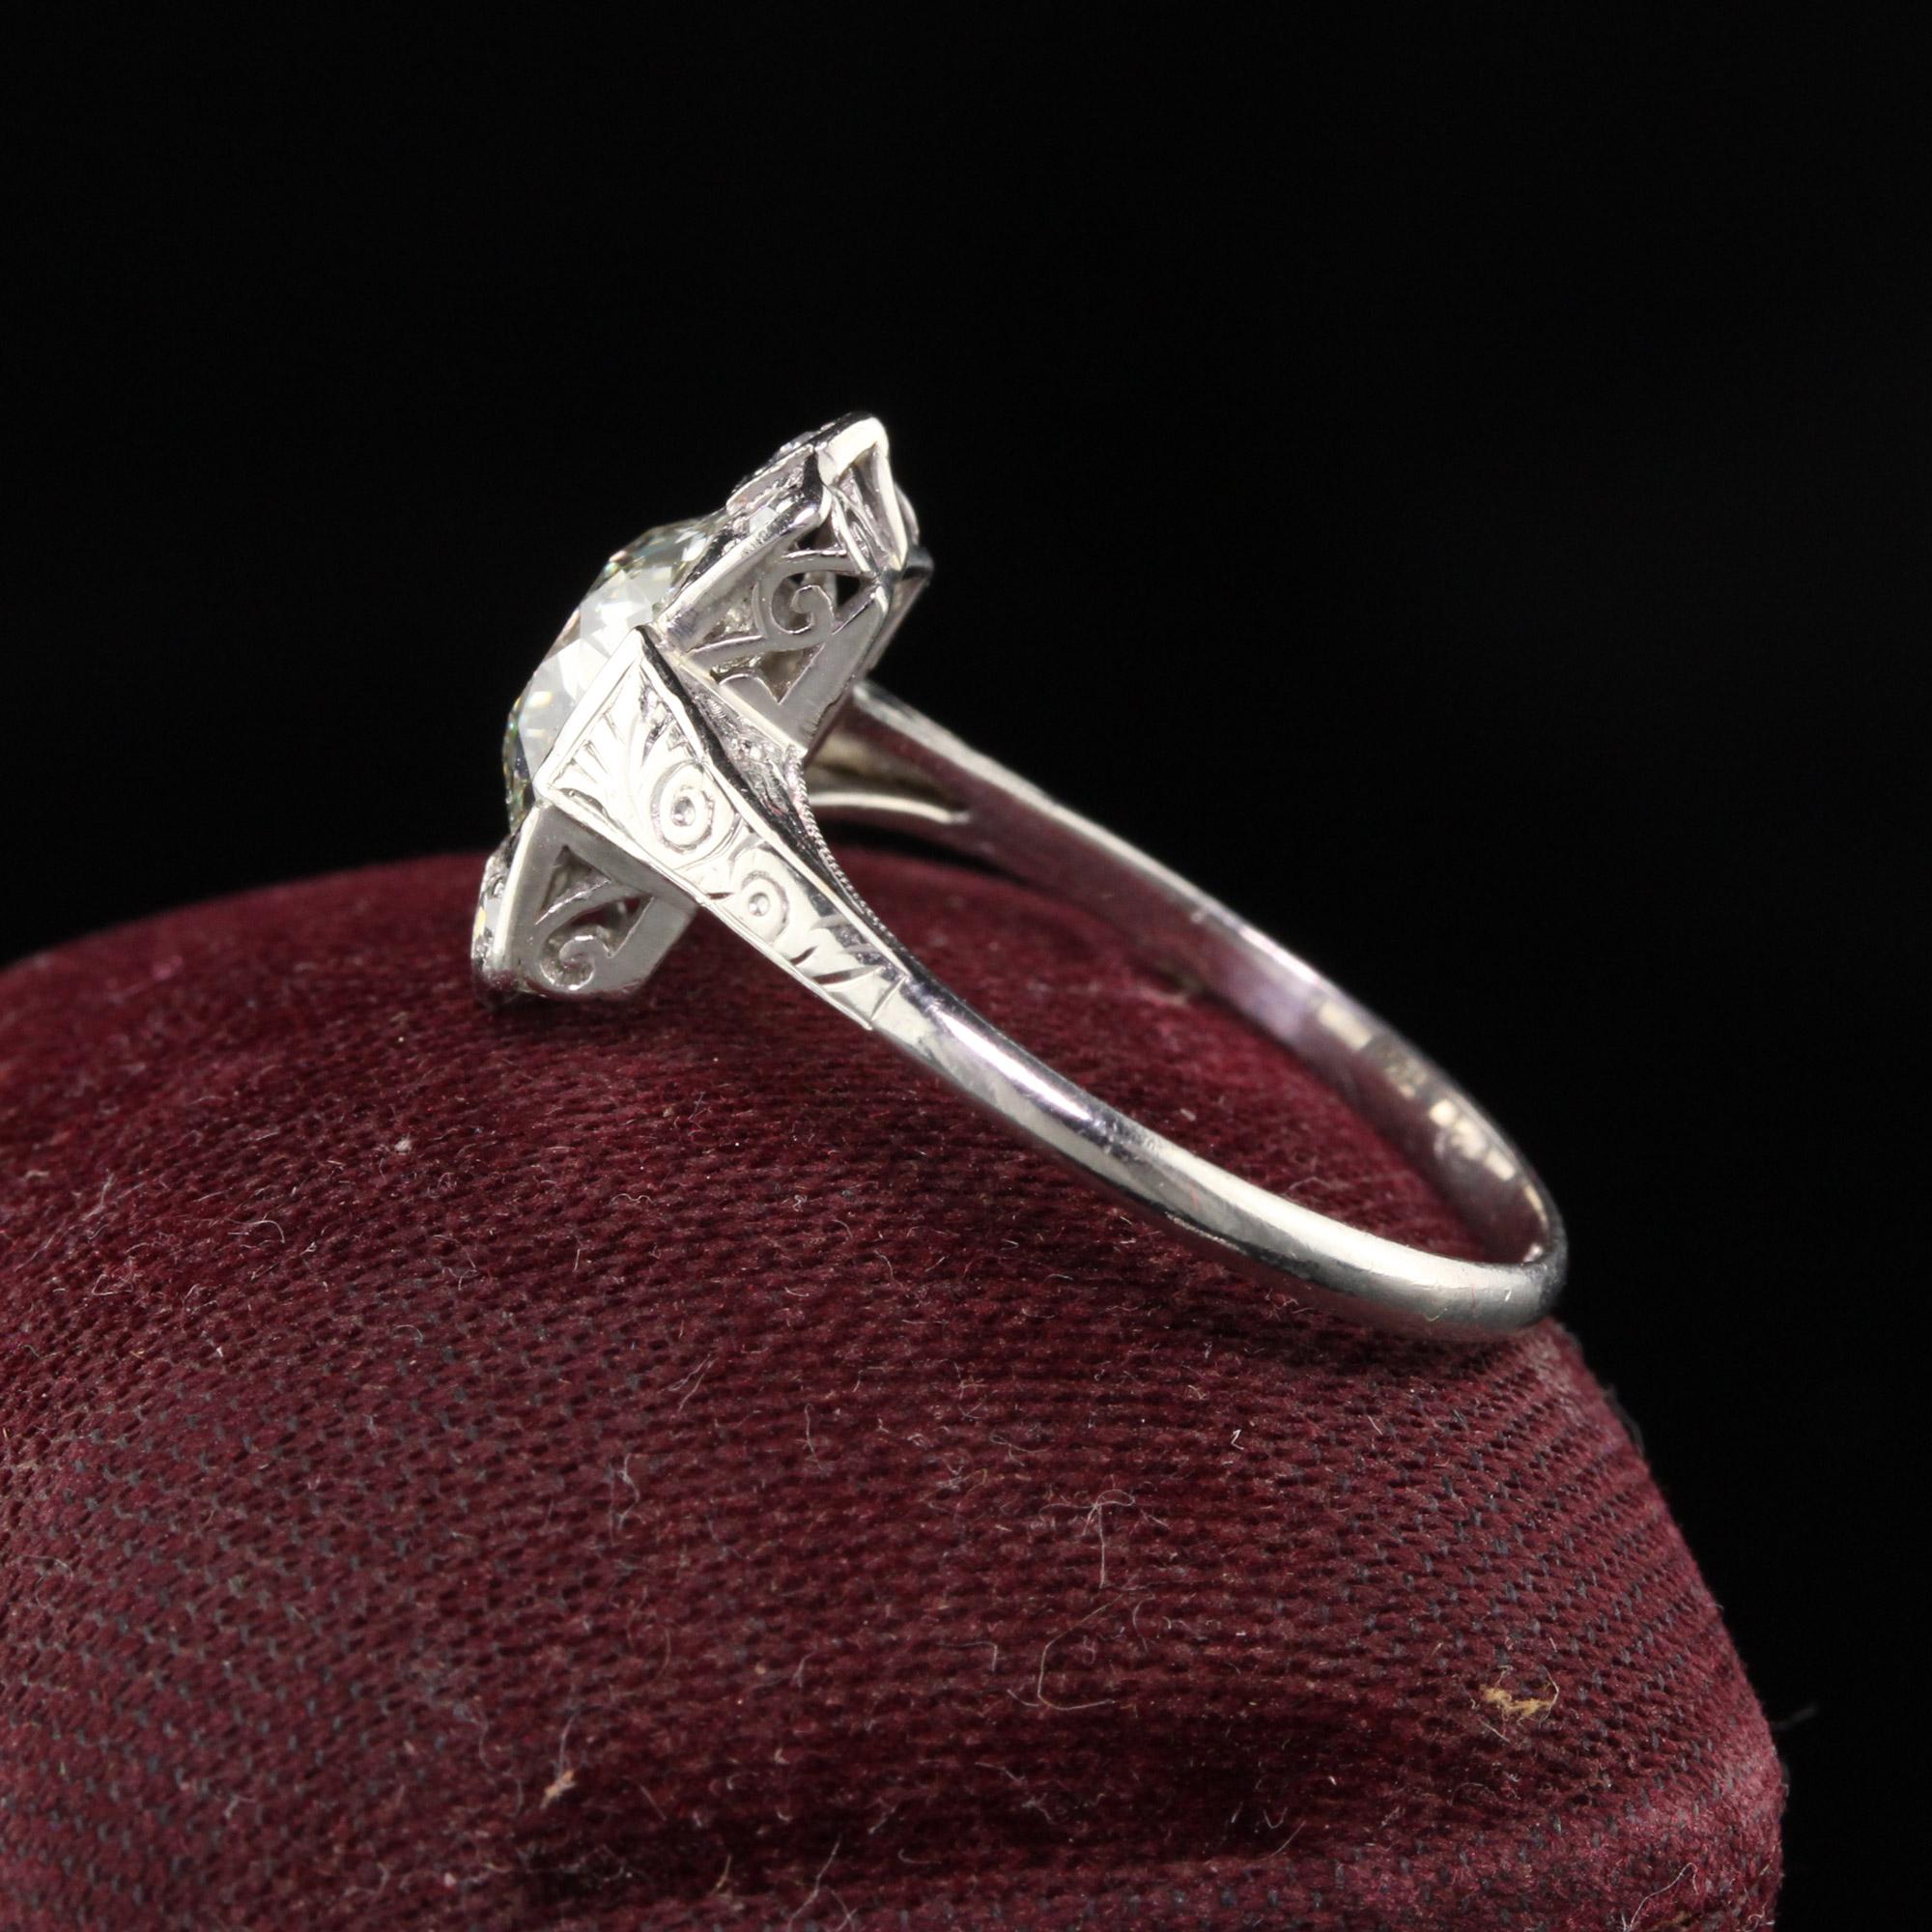 An incredible Antique Art Deco Platinum Old European Cut Diamond Engagement Ring. It features a 1.30 ct old european cut diamond in the center on an amazing art deco mounting. The center diamond looks like it is floating on your